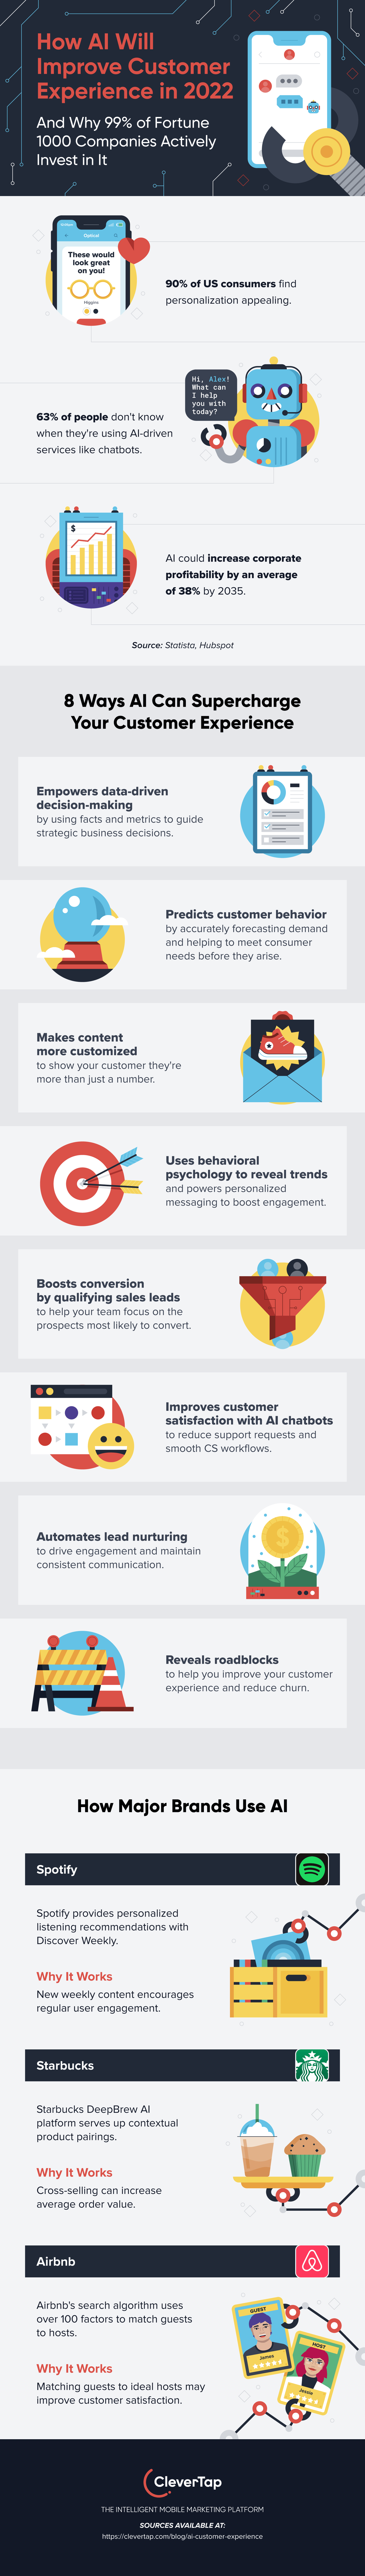 infographic on how ai improves customer experience